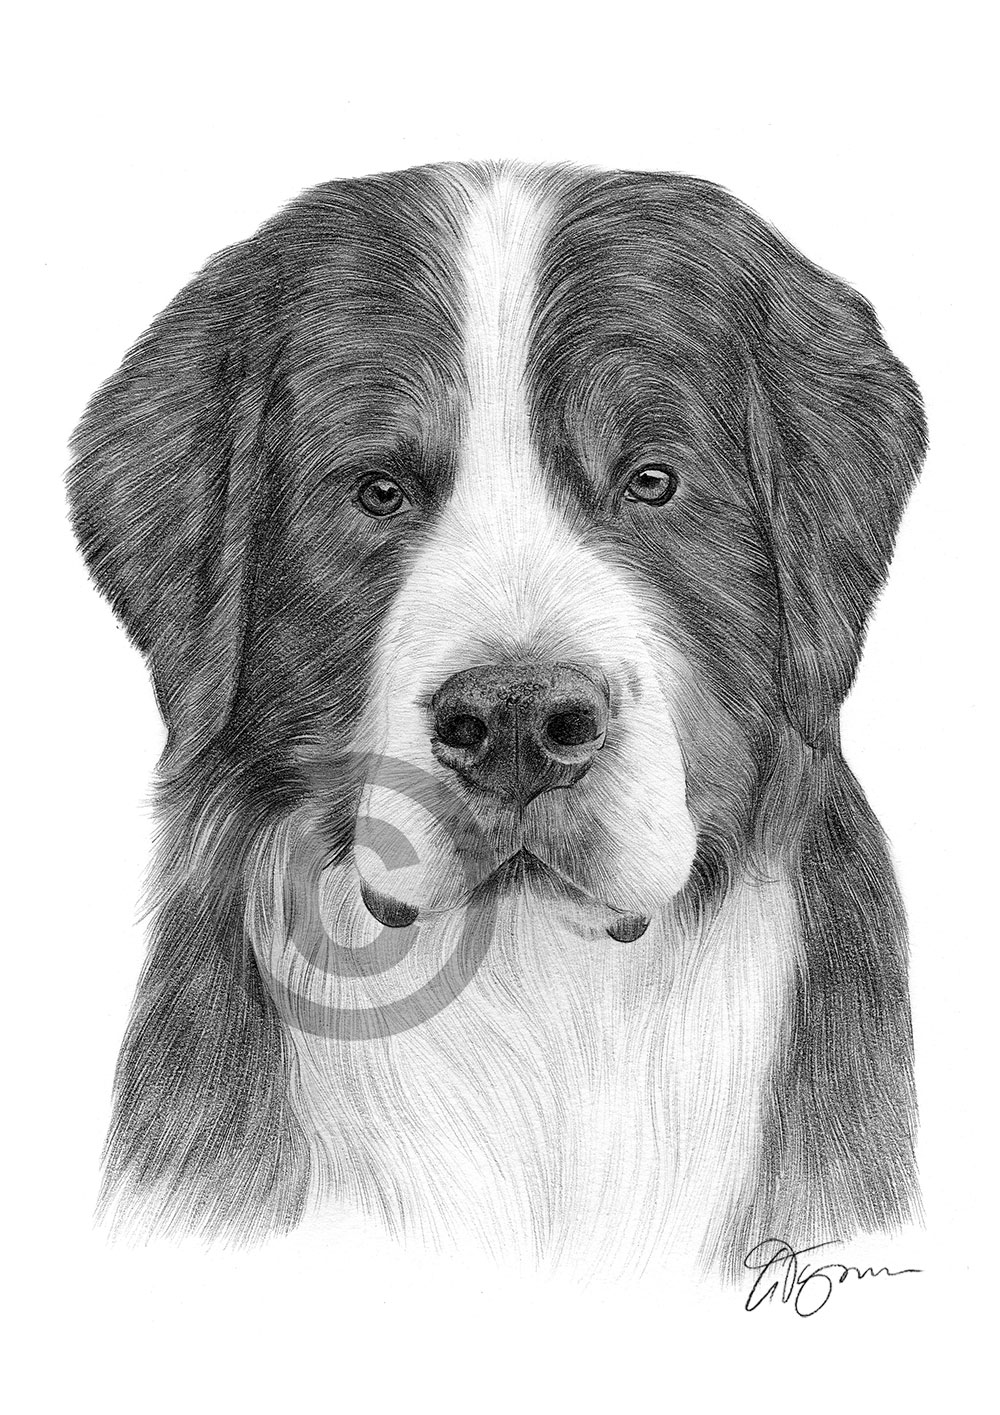 Pencil drawing of a Bernese Mountain Dog by artist Gary Tymon